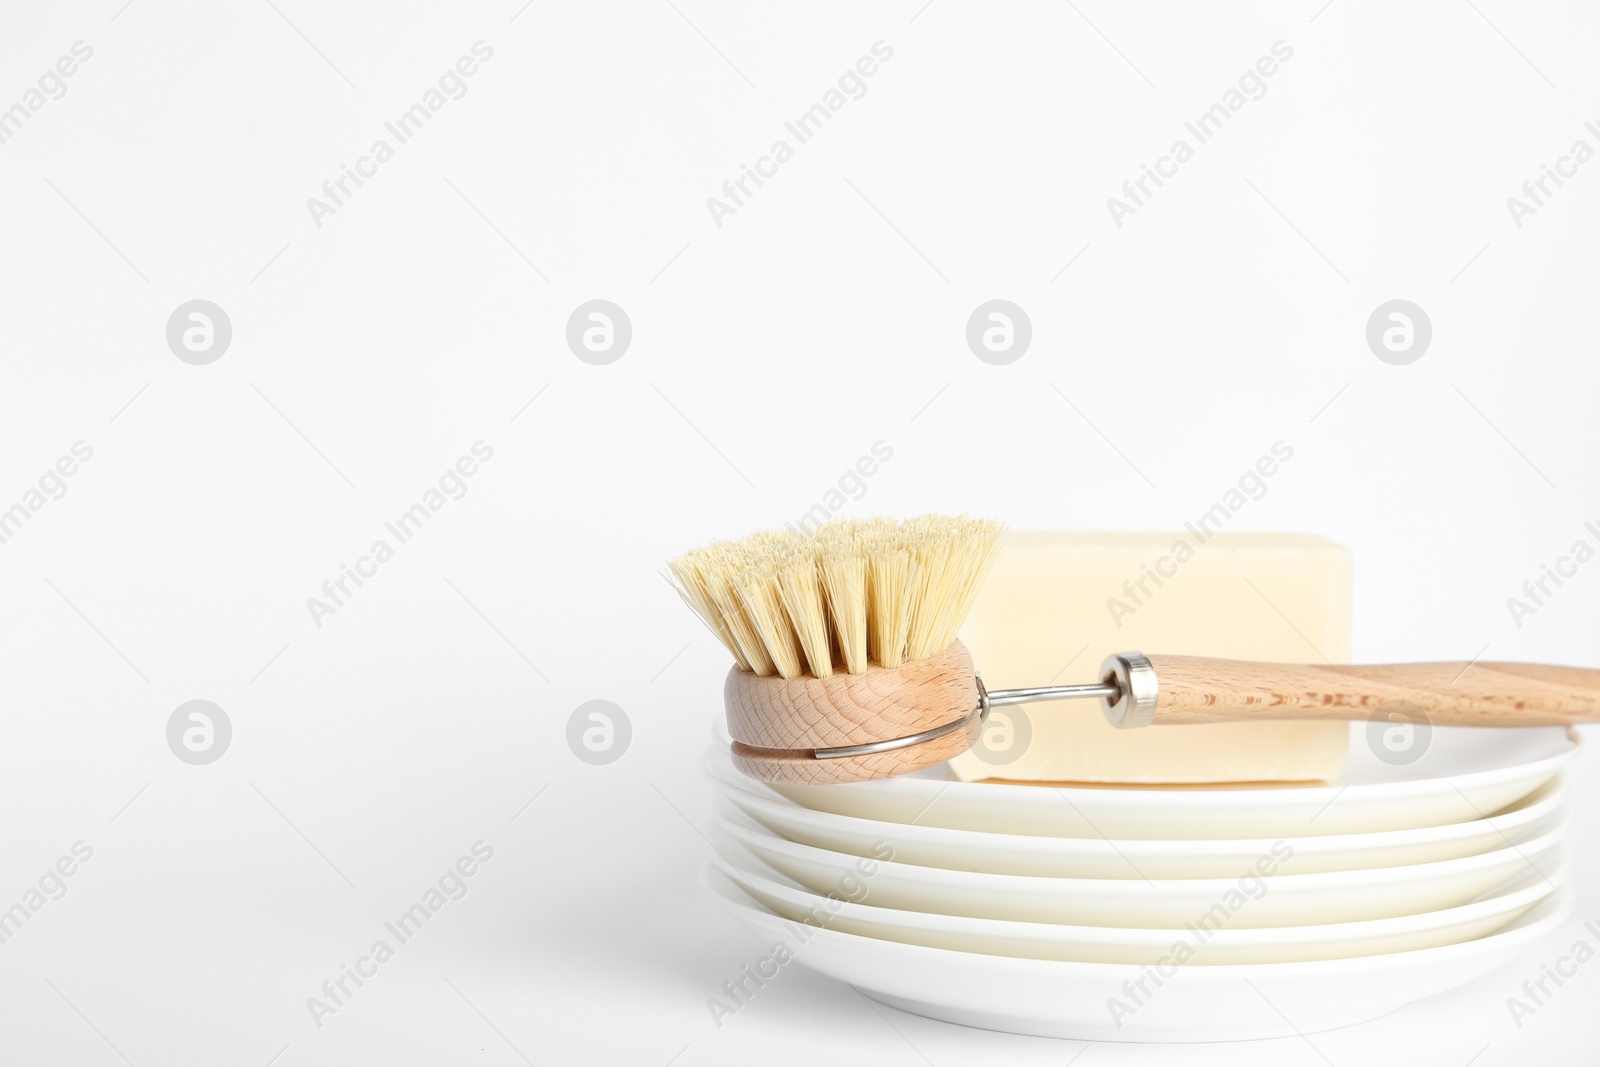 Photo of Cleaning brush and soap bar for dish washing on plates against white background